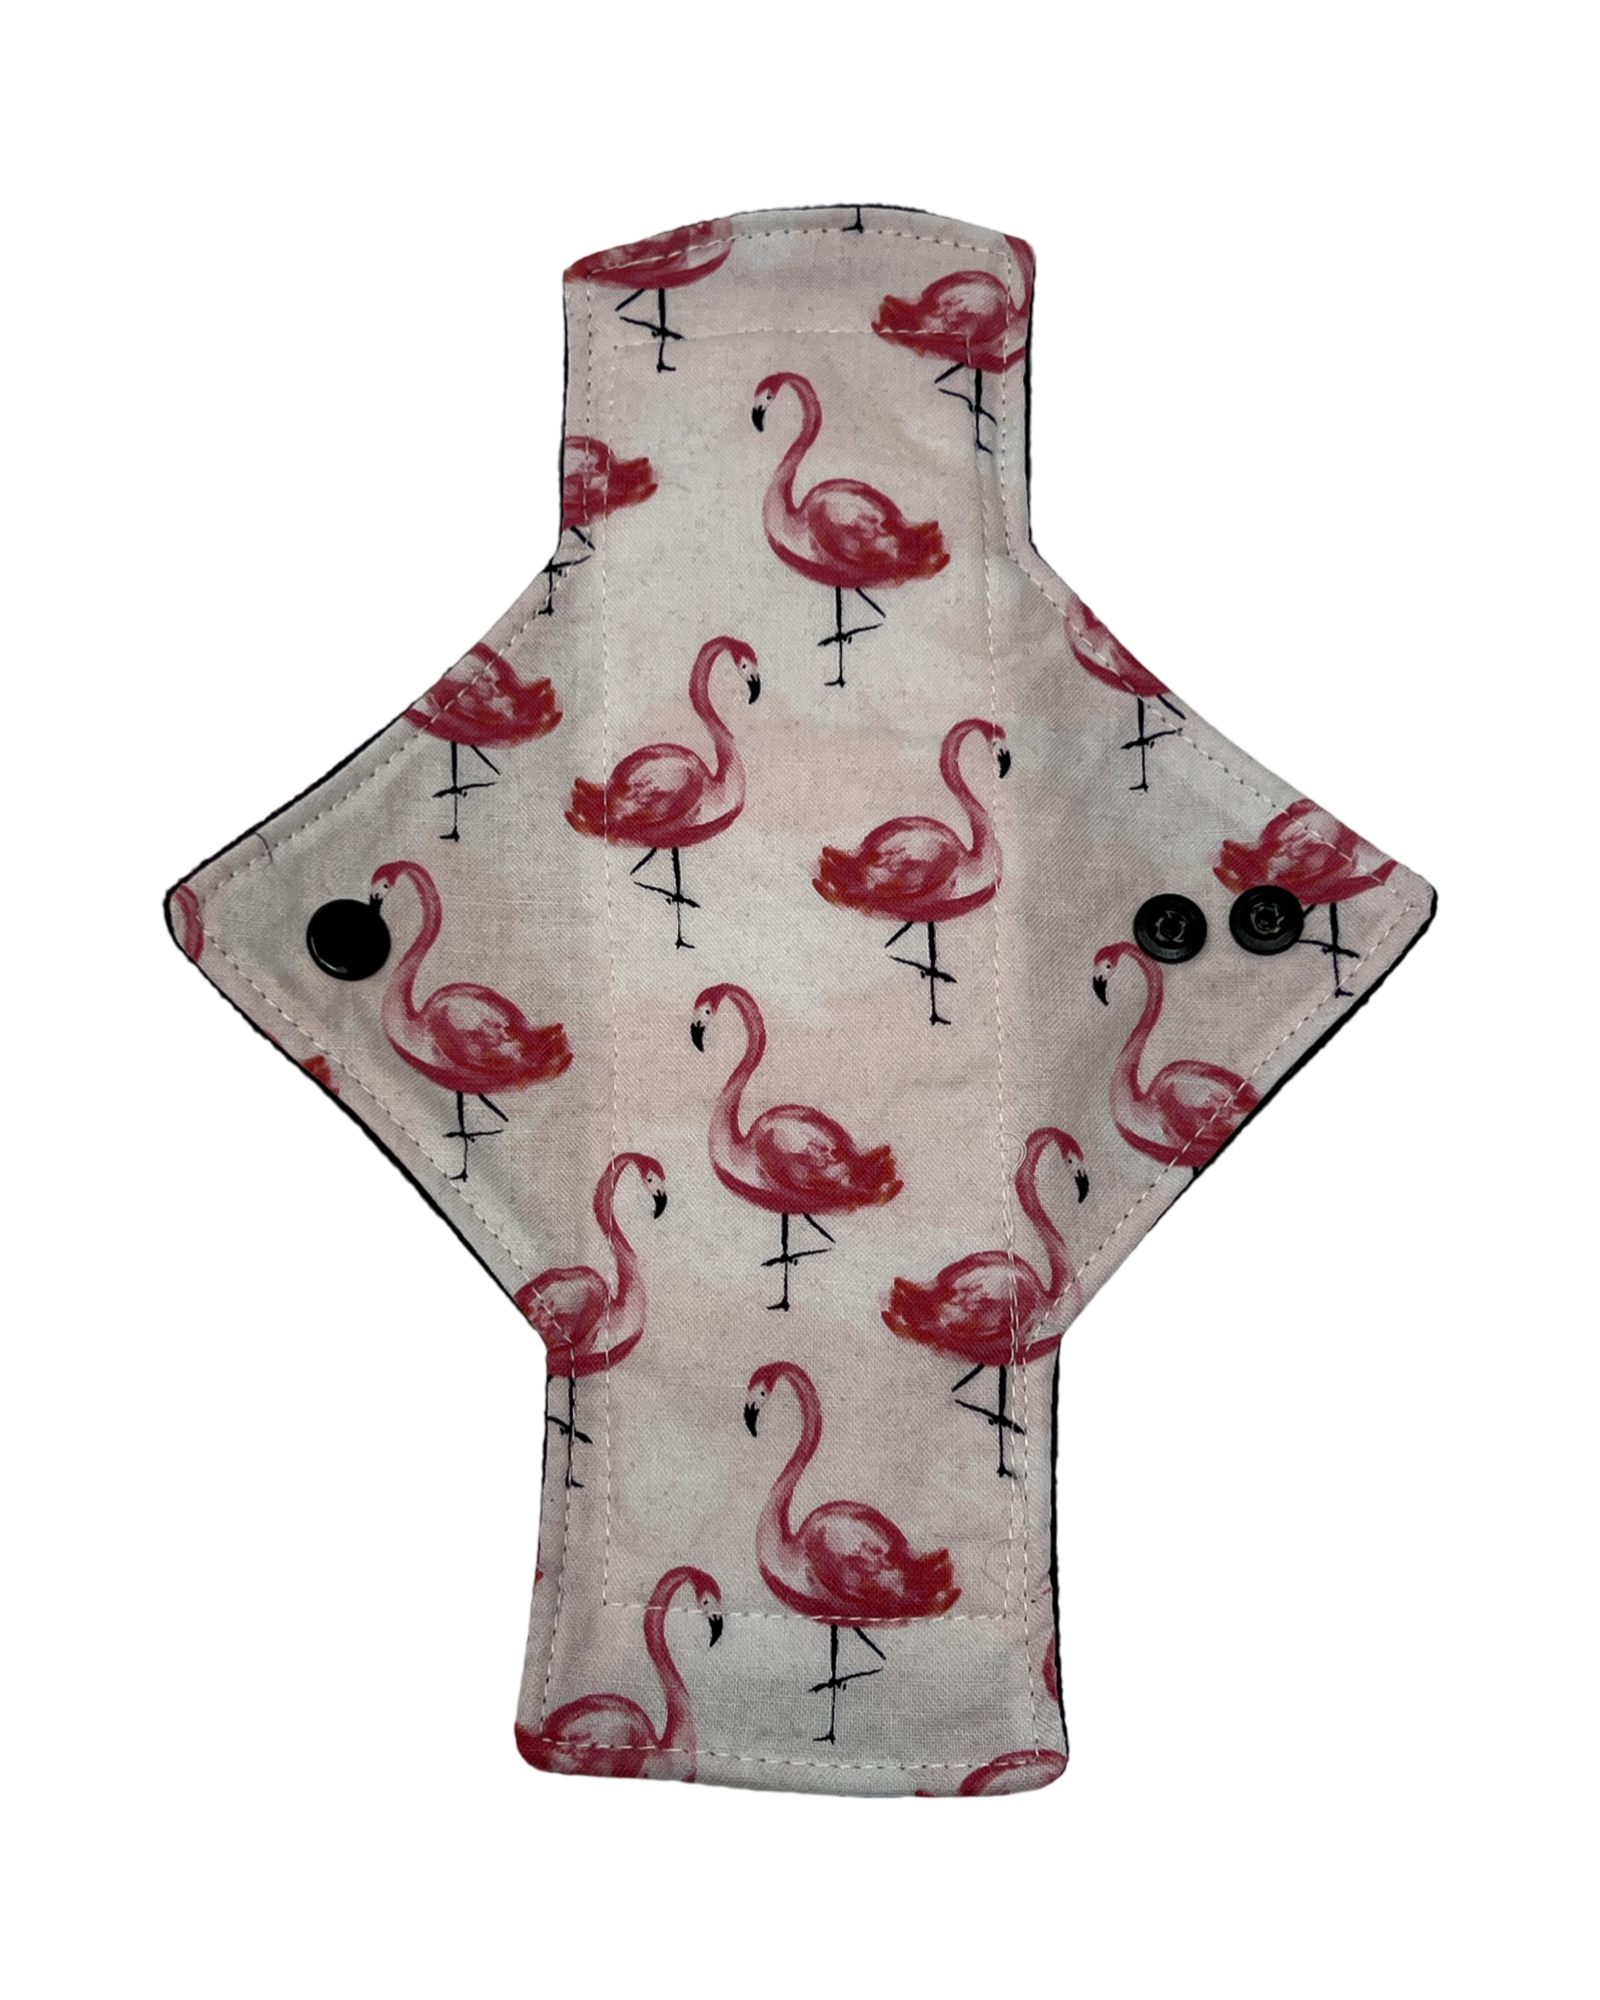 Stash Dash Event 2023 - Backed with Softshell Fleece Pink Flamingos Limited Edition Cotton Single Light Flow Day Pad - Tree Hugger Cloth Pads